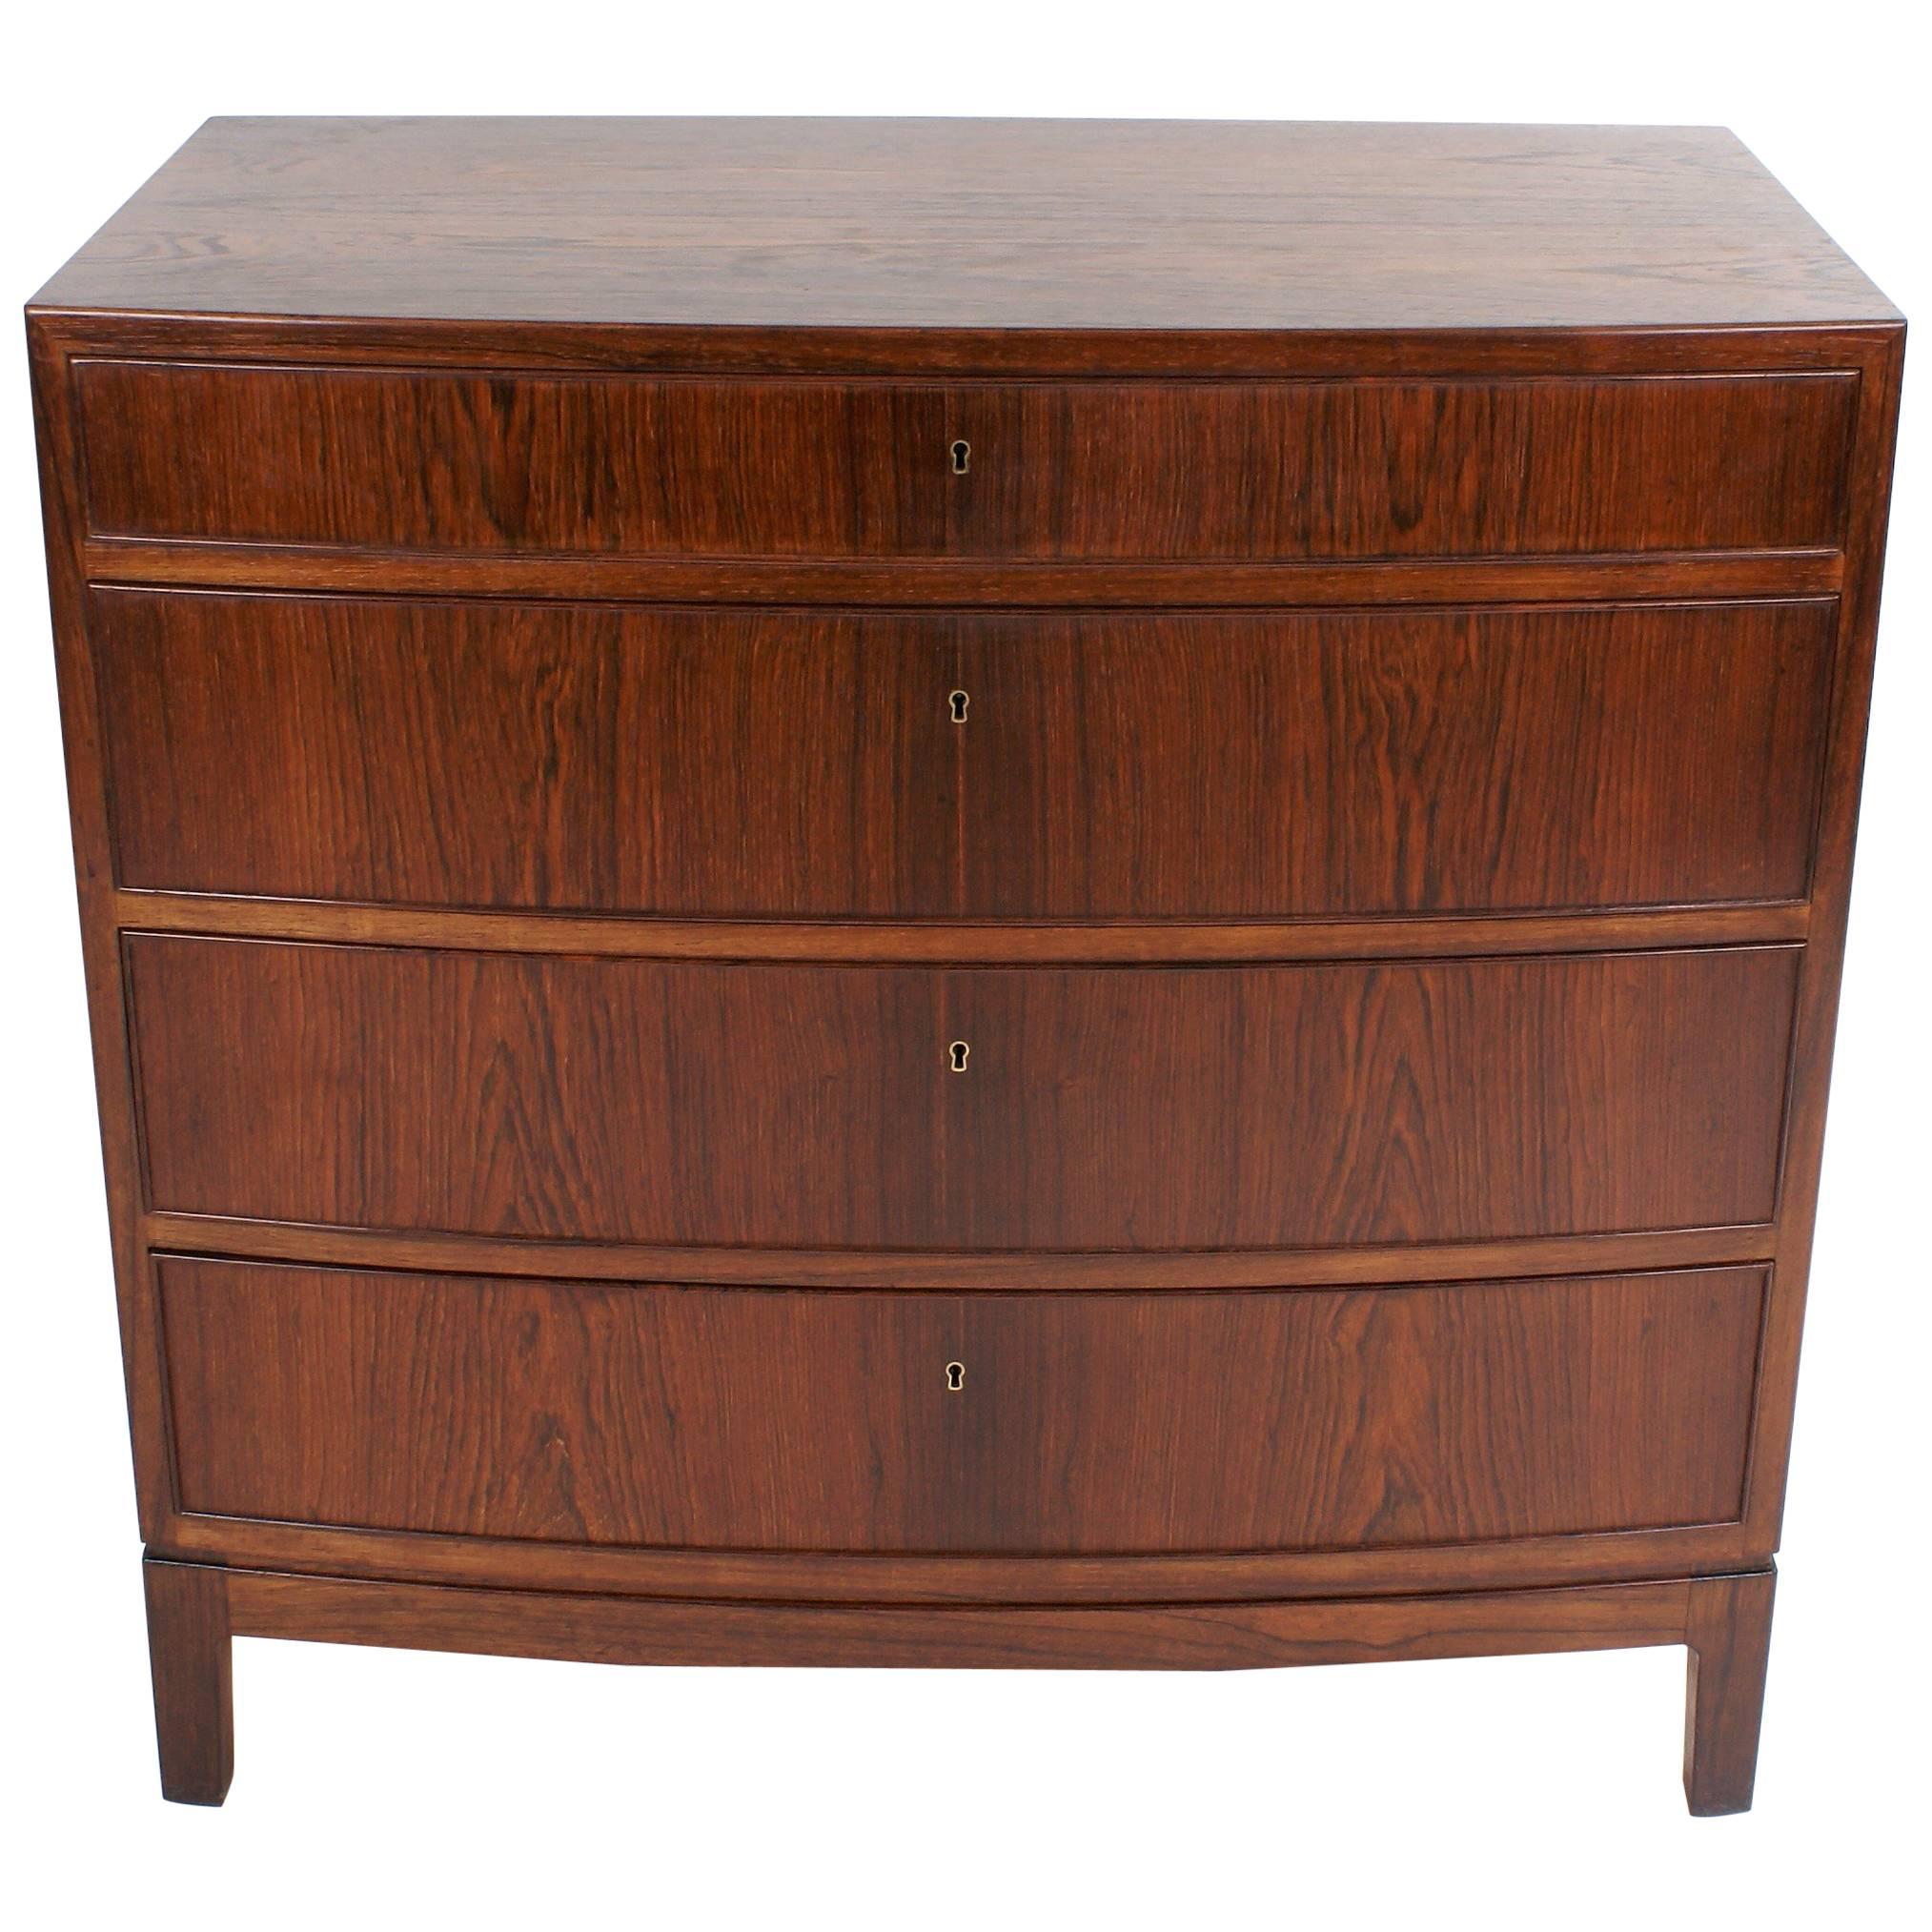 Ole Wanscher Chest of Drawers in Rosewood for A. J. Iversen